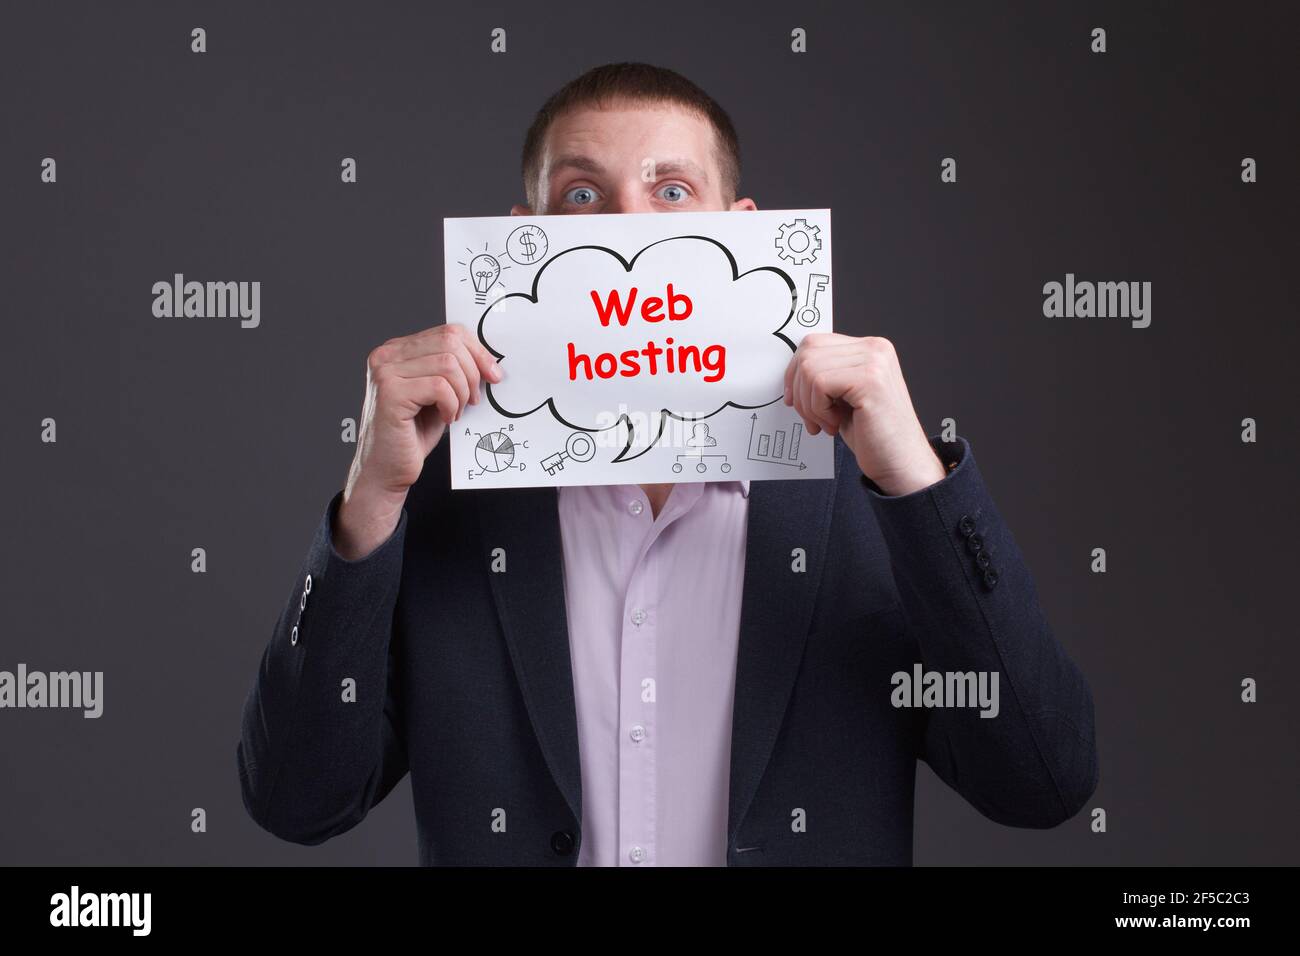 Business, technology, internet and network concept. Young businessman thinks over the steps for successful growth: Web hosting Stock Photo